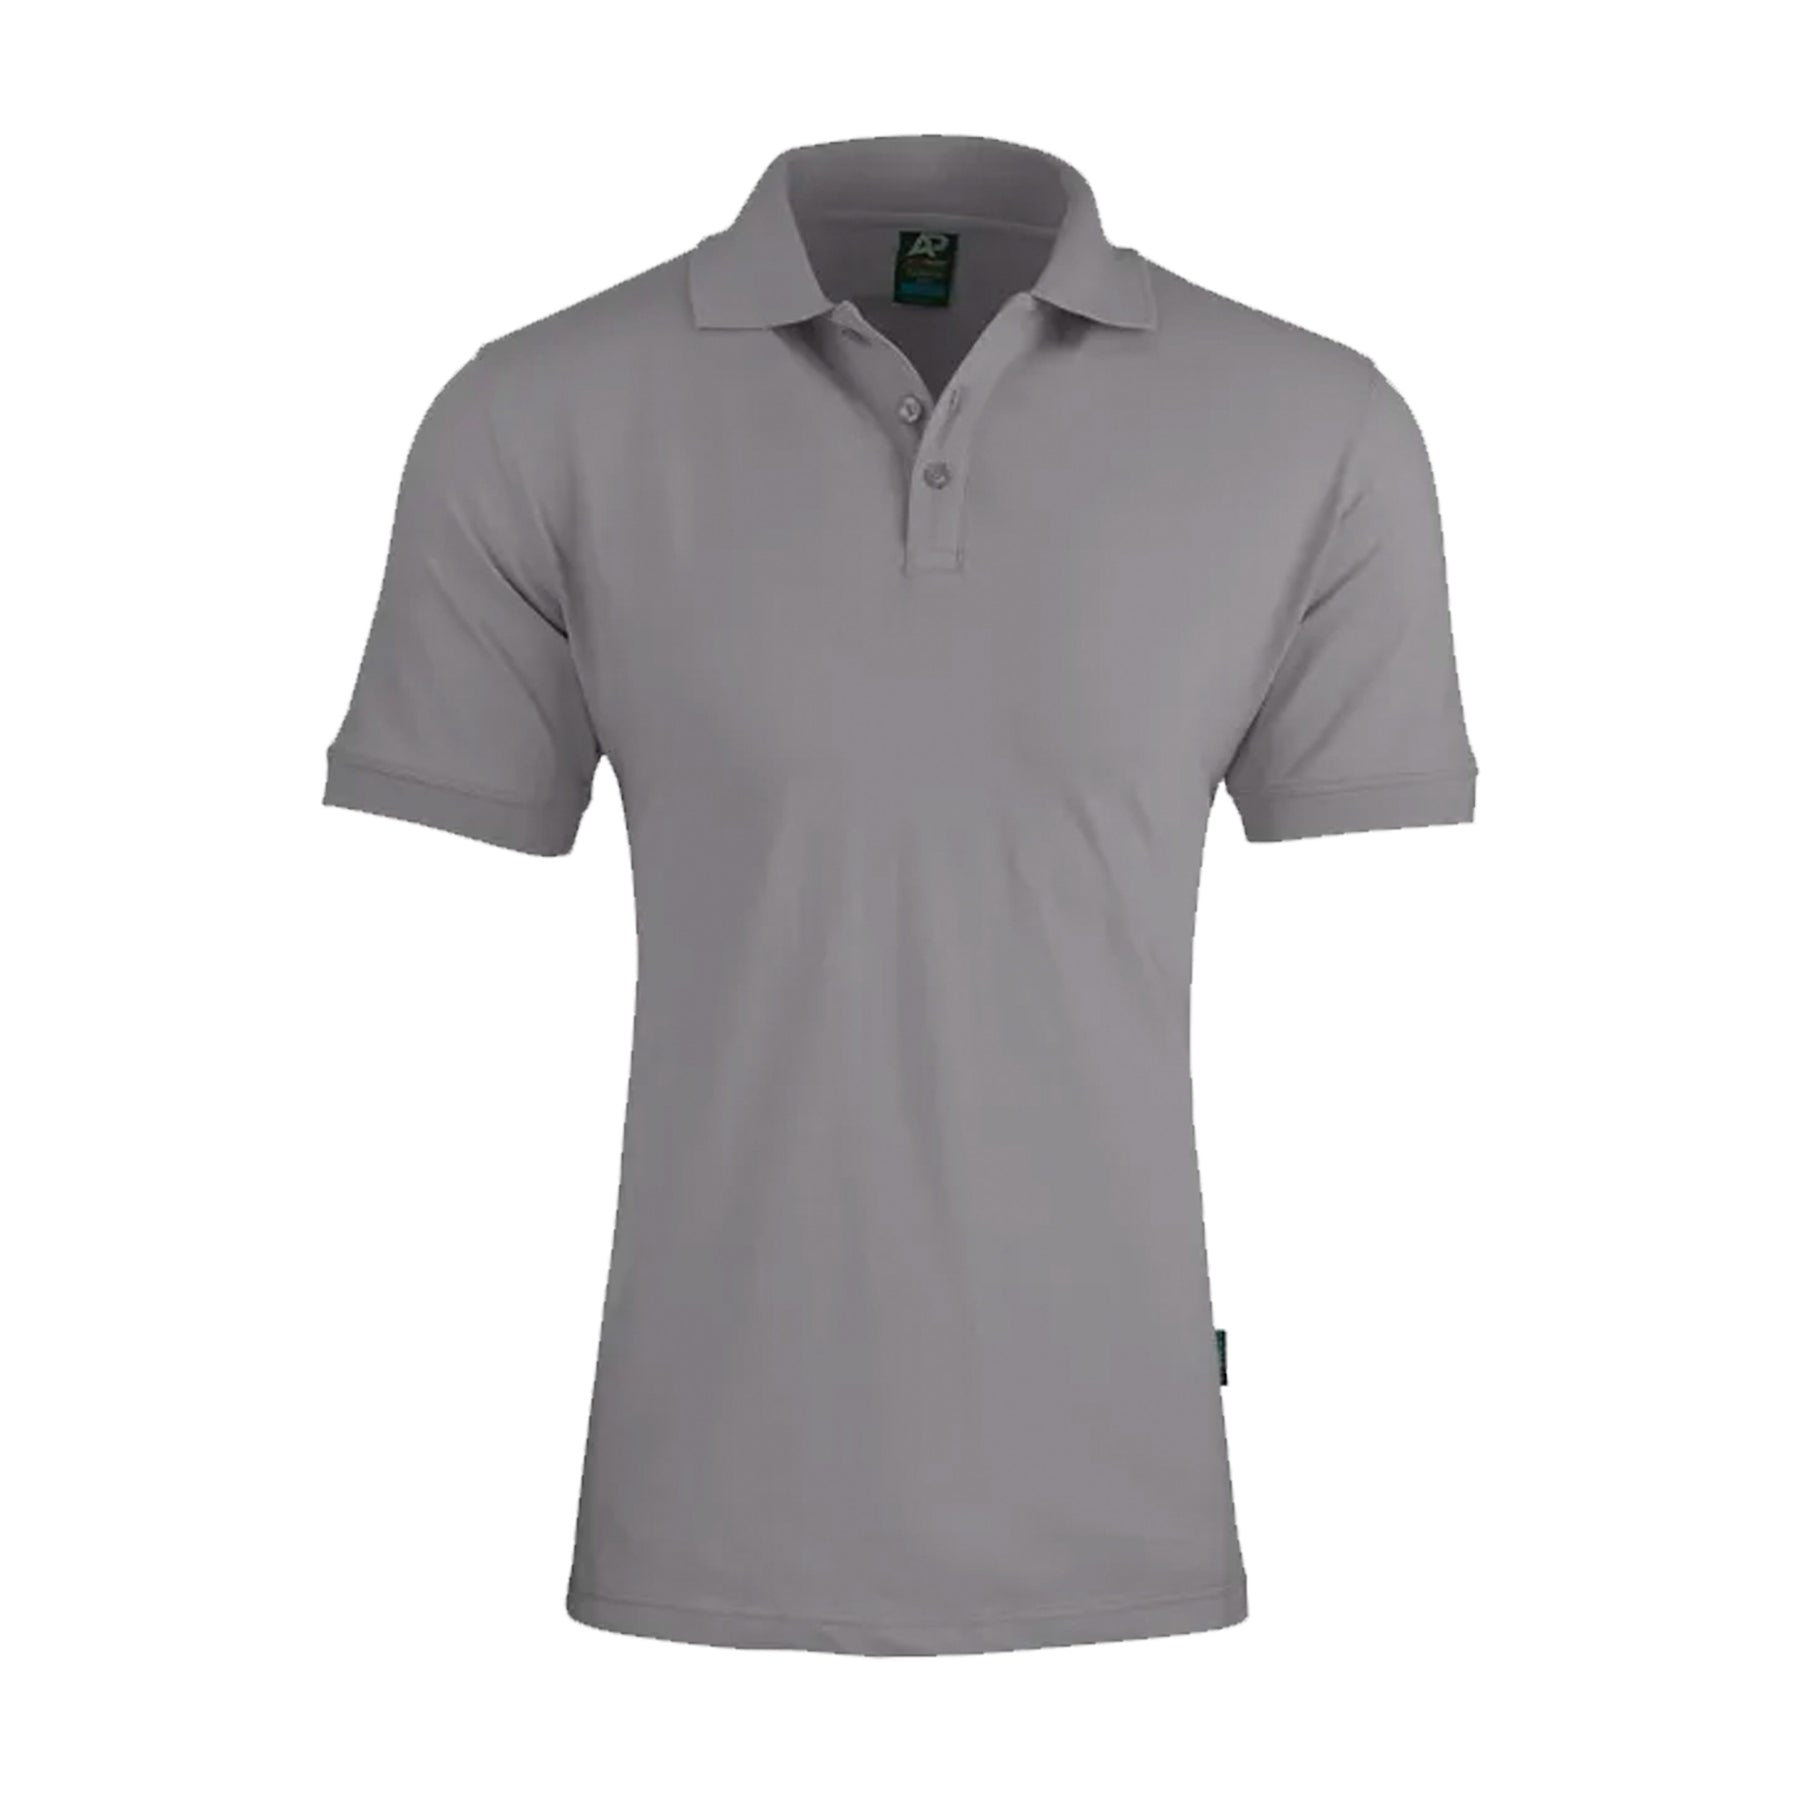 aussie pacific claremont mens polo in silver